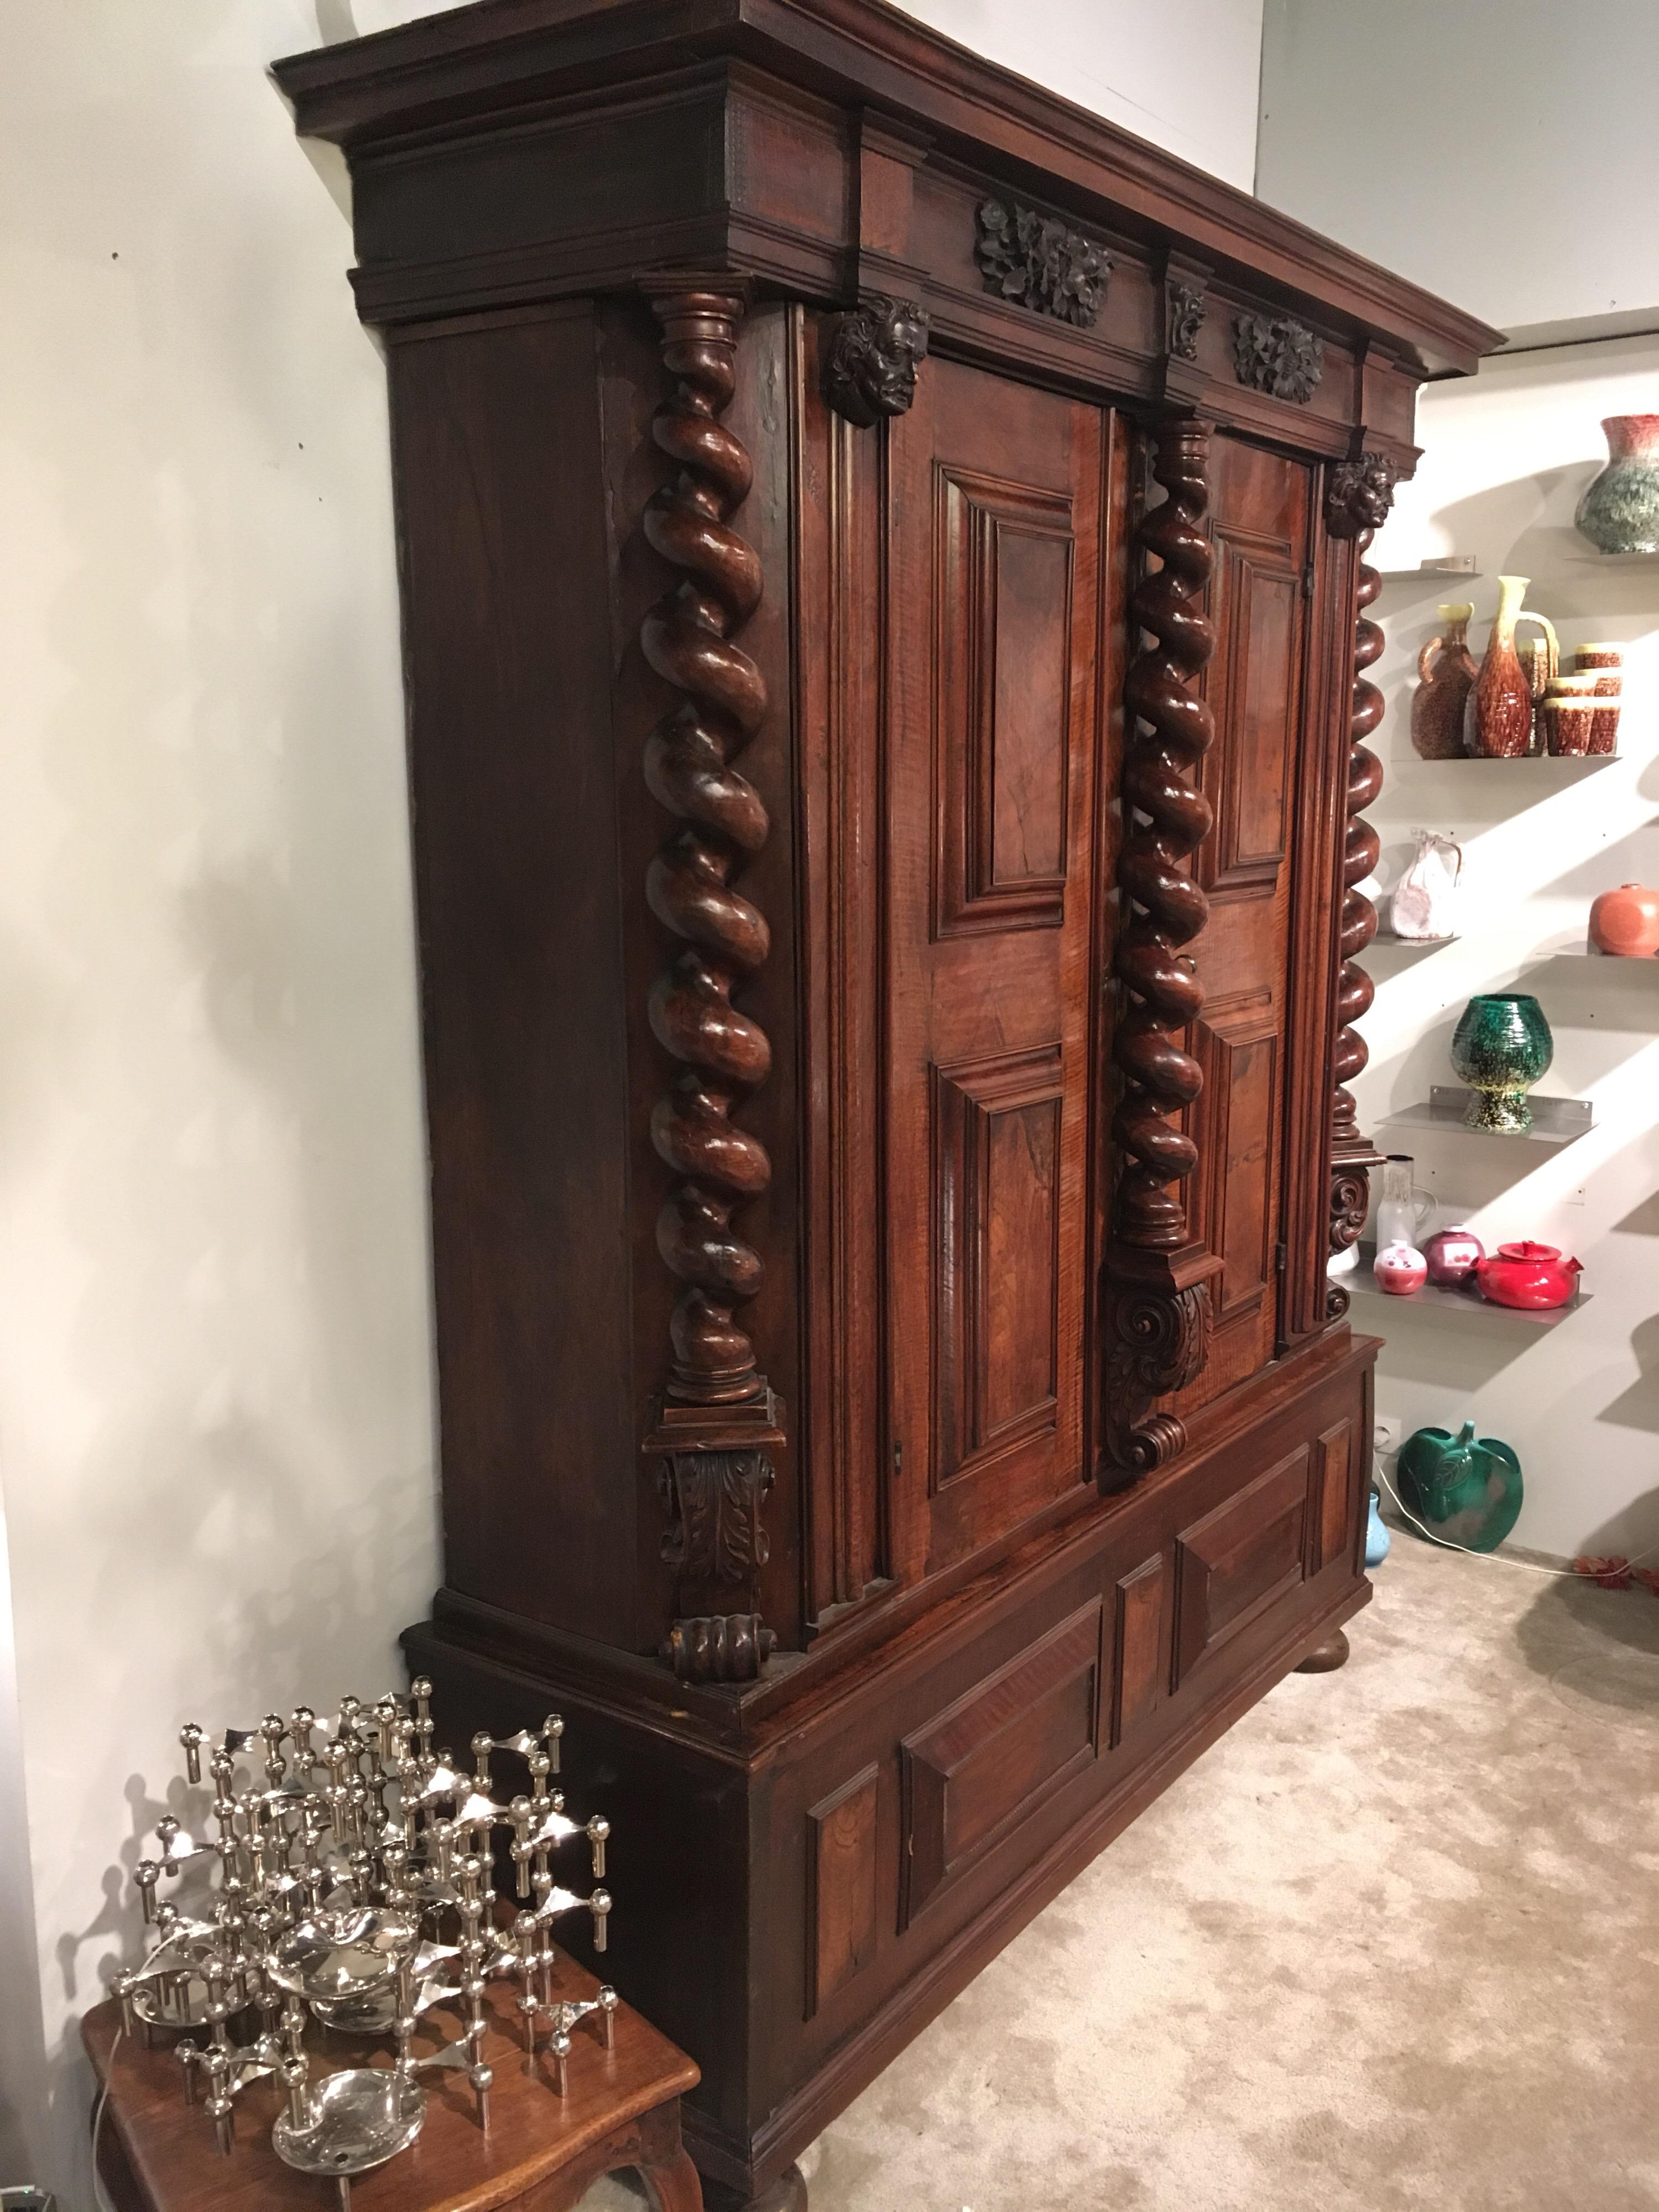 Very beautiful armoire, wardrobe or cabinet early 17th century, East of France, probably Alsace.
Structure in fir wood and fully veneered with oak wood.
Original locks and fittings.
Overall few restorations.
Assembly of the cabinet body by means